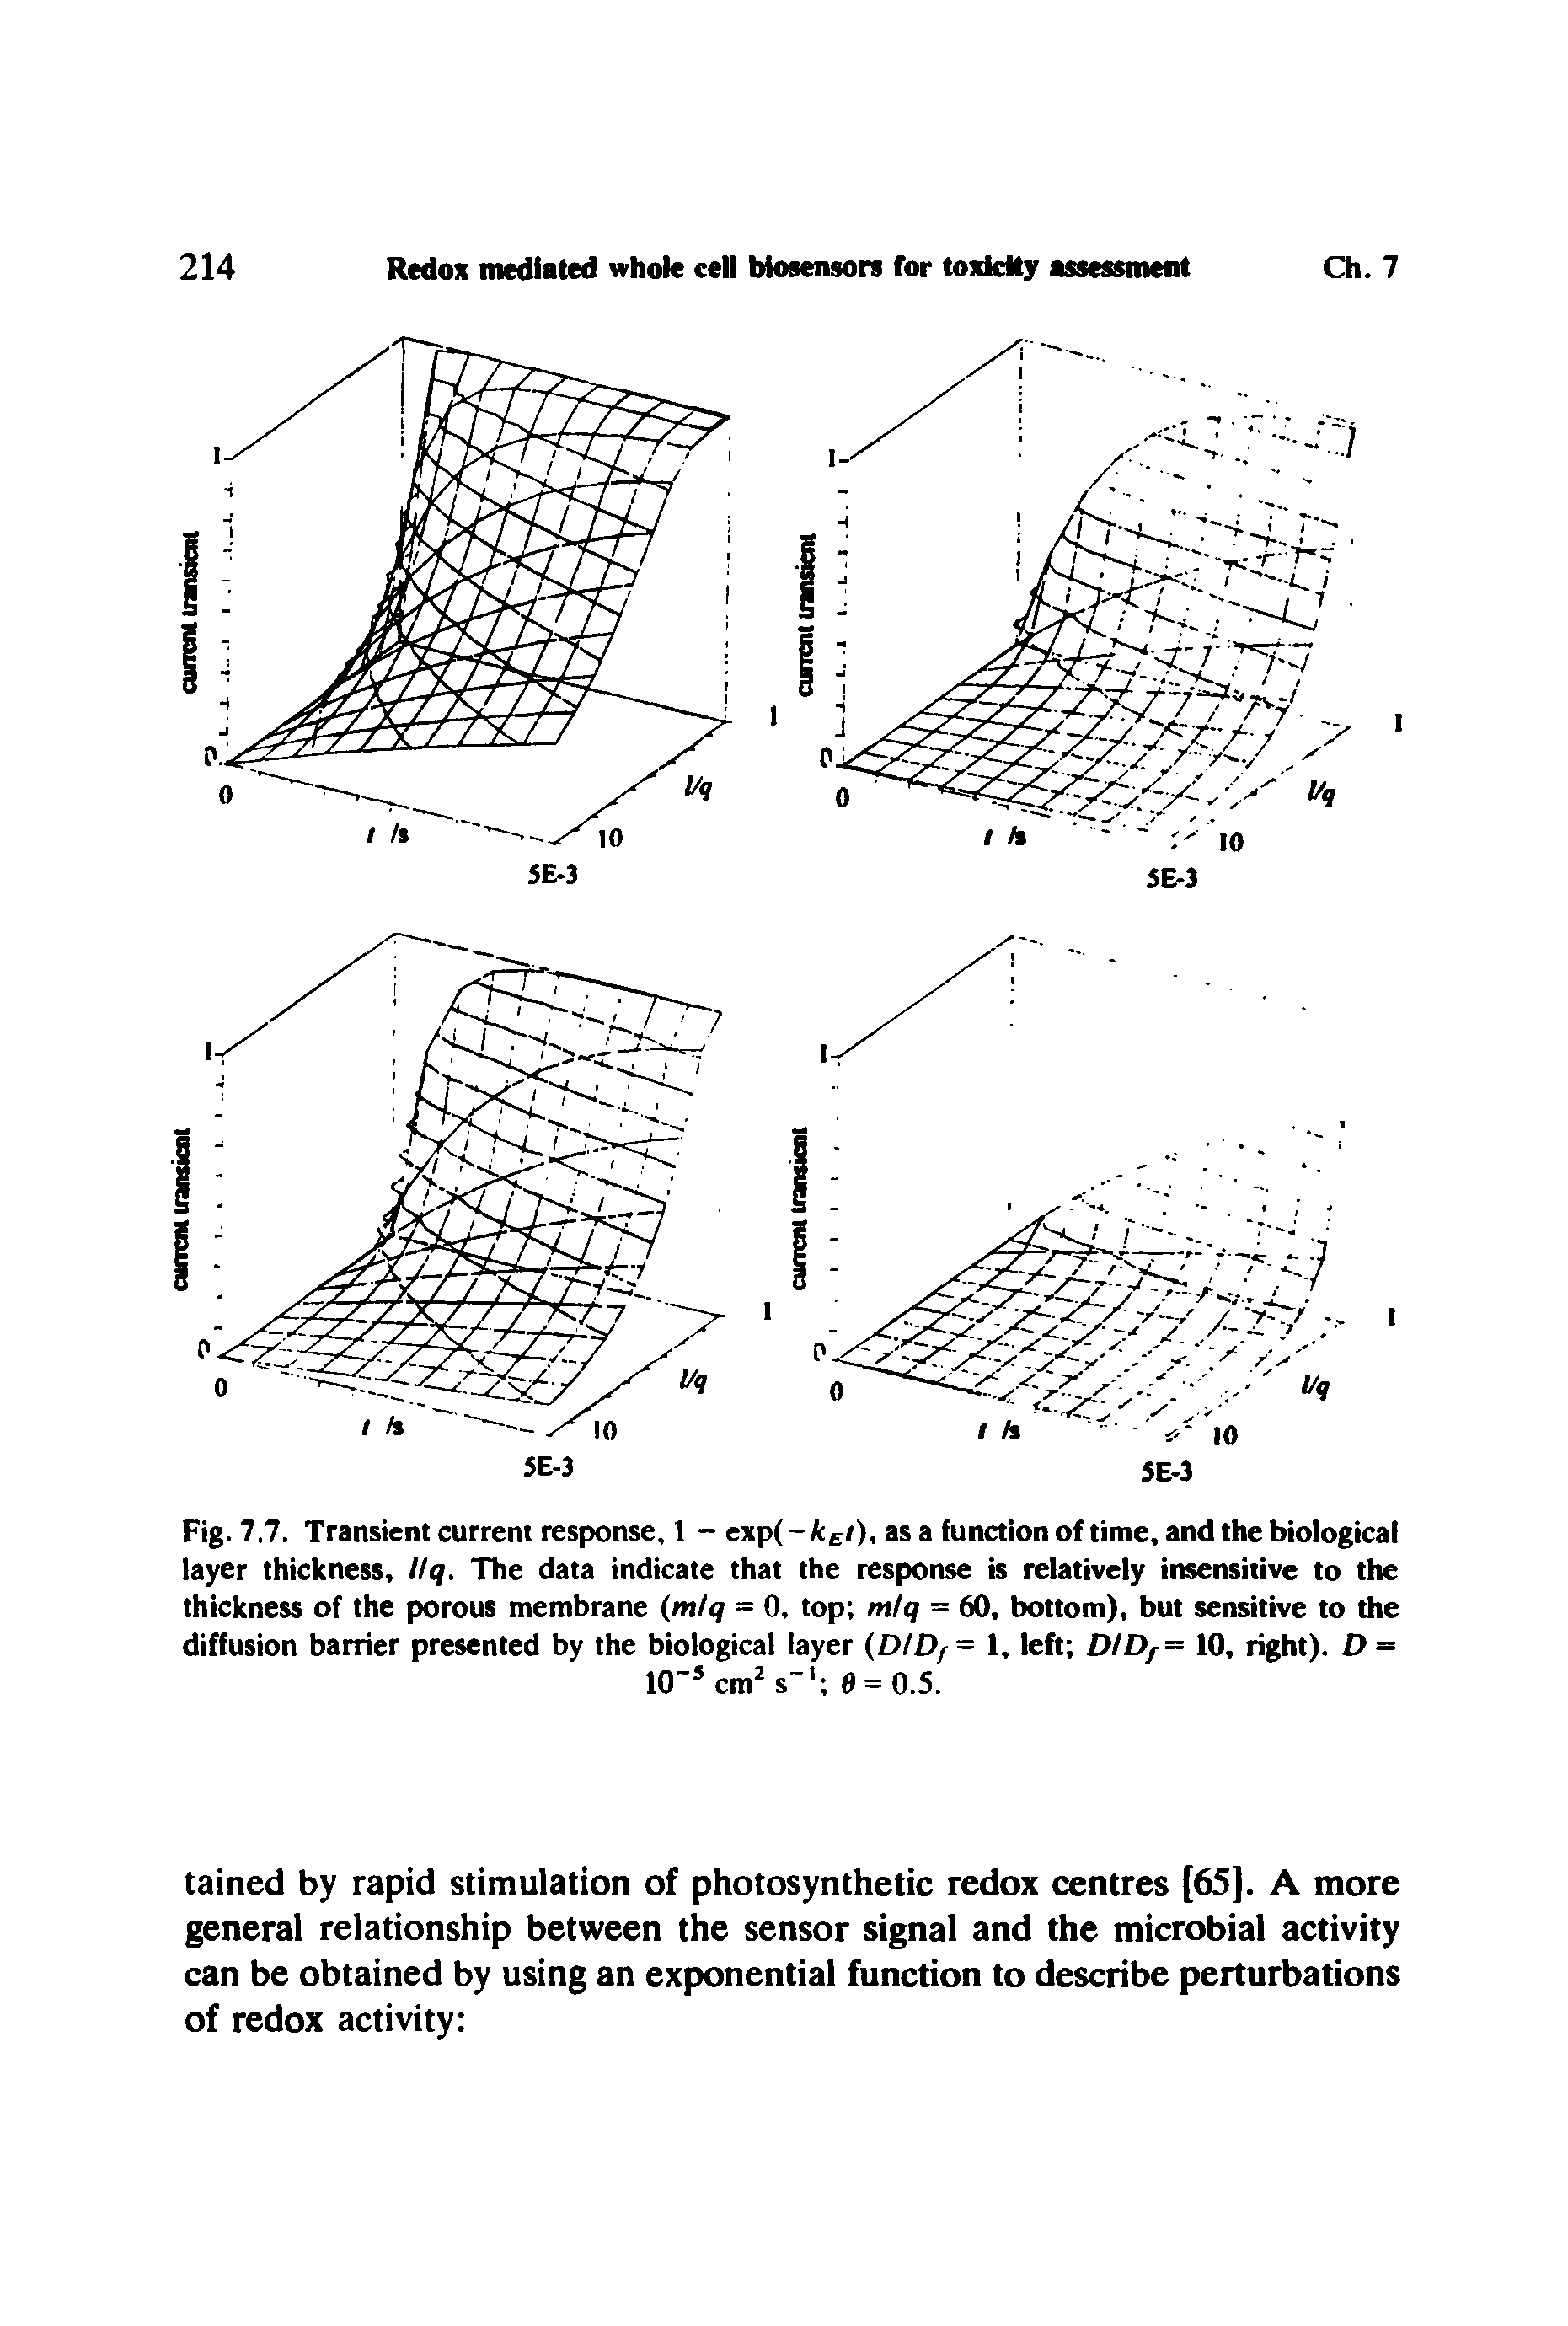 Fig. 7.7. Transient current response, 1 - exp(-kEi), as a function of time, and the biological layer thickness, Itq. The data indicate that the response is relatively insensitive to the thickness of the porous membrane (mtq = 0, top ntlq = 60, bottom), but sensitive to the diffusion barrier presented by the biological layer (DIDf= 1, left DIDf= 10, right). D =...